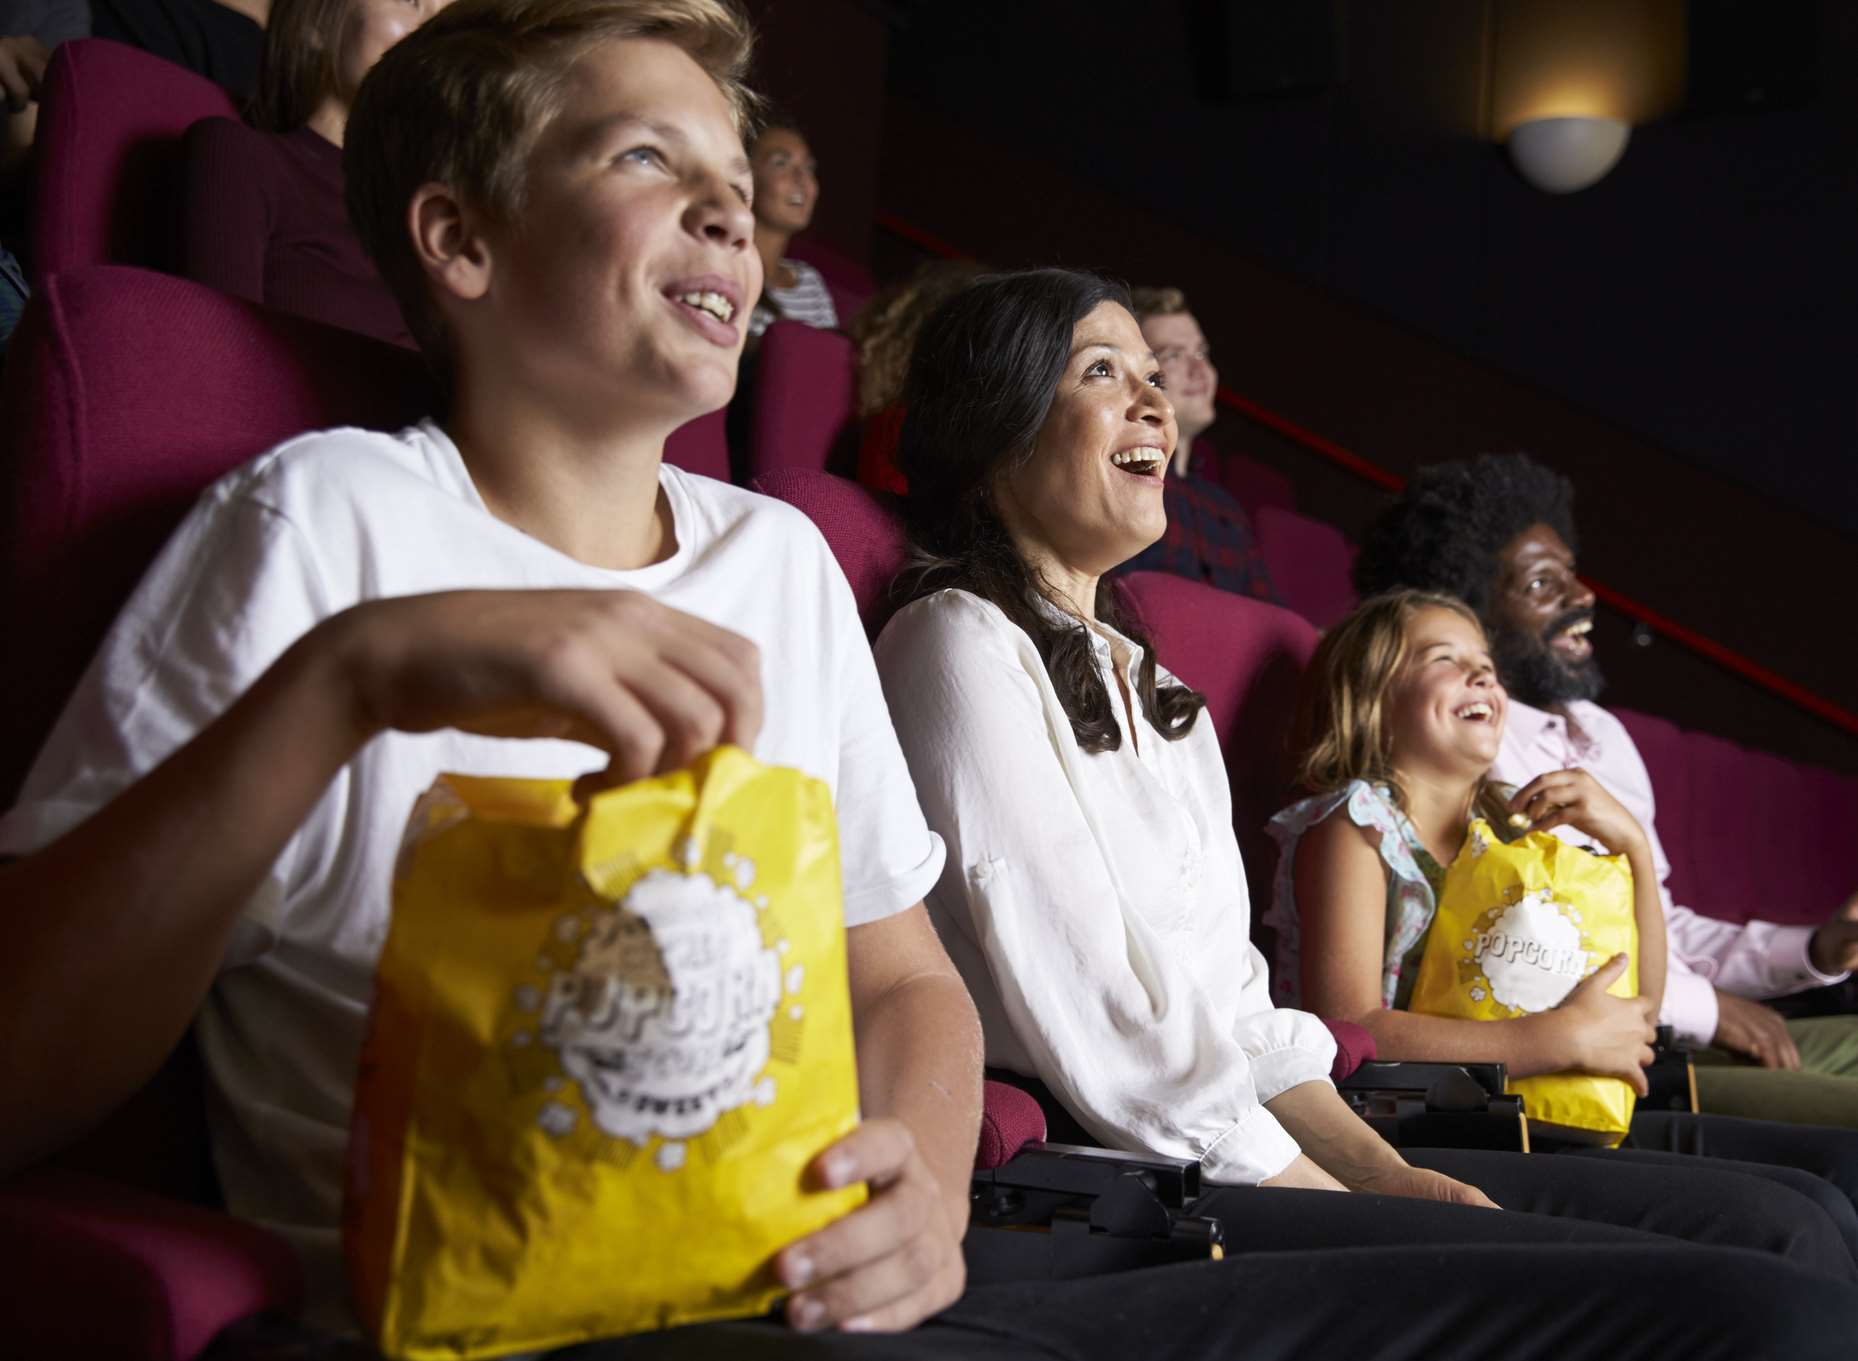 Have a blockbuster birthday with a cinema outing